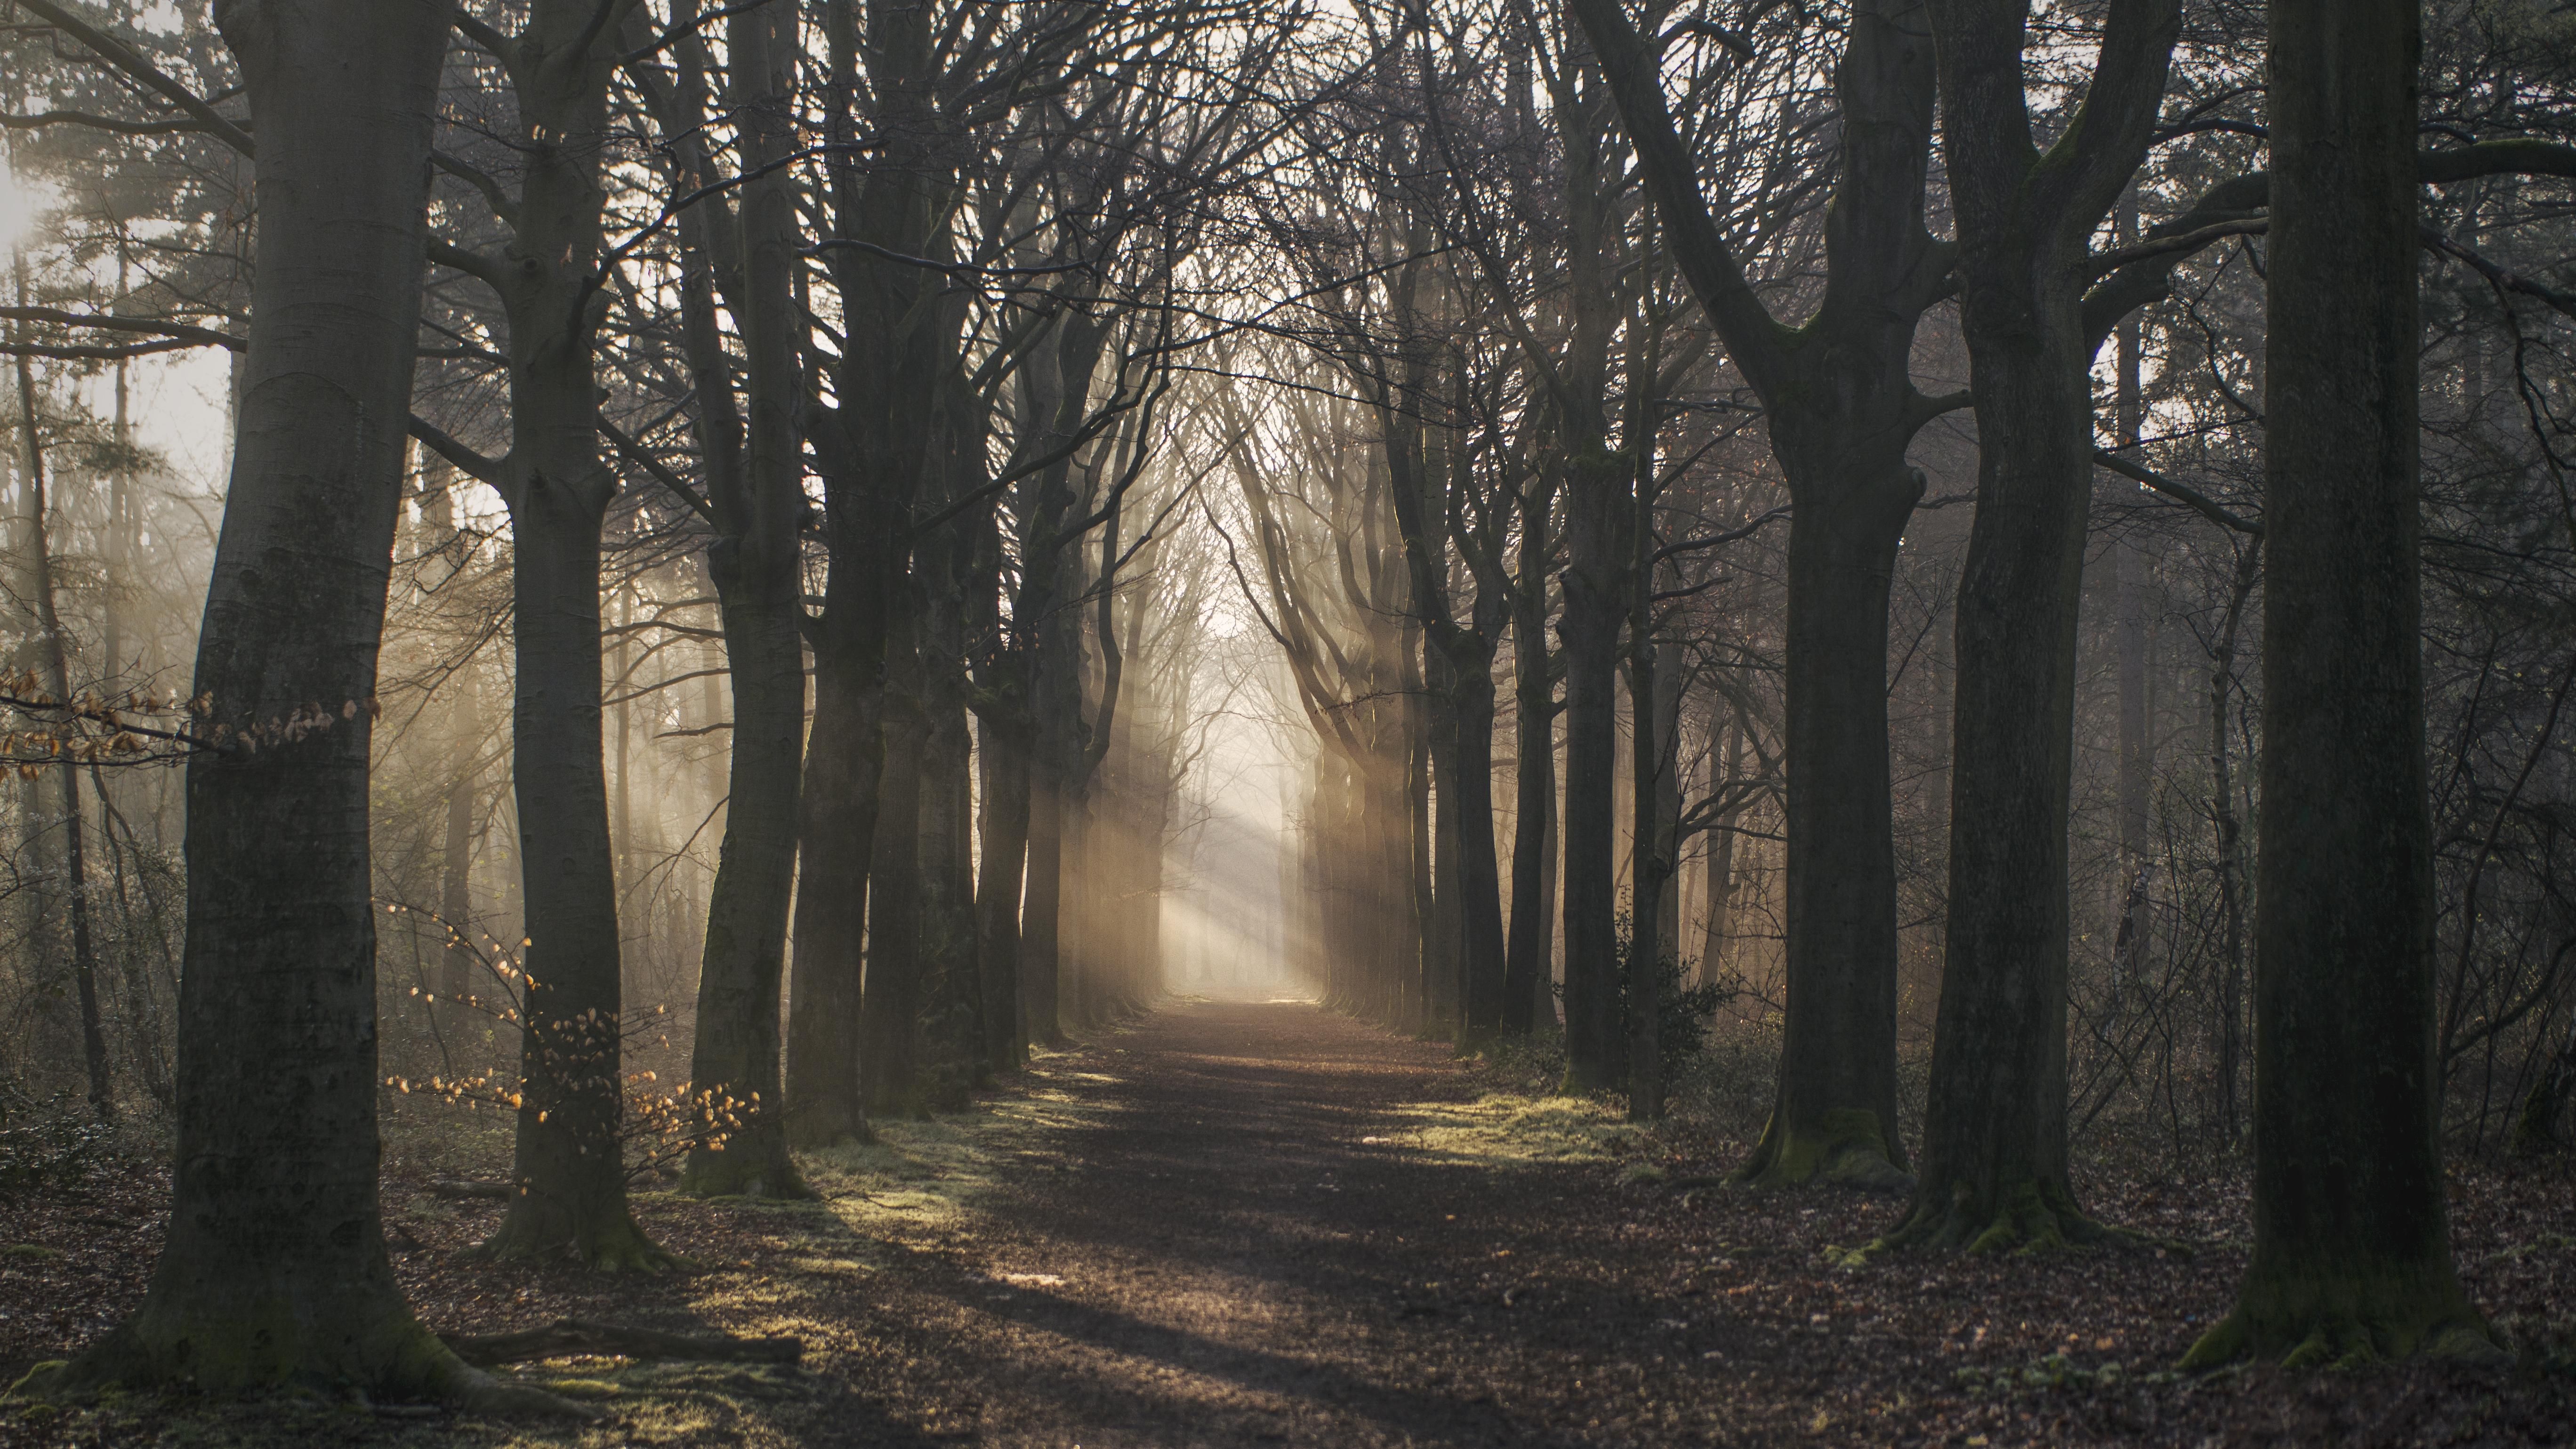 Enlightened path leading into the forest. [OC][5472x3078][Netherlands op Zoom]. Bergen op zoom, High quality wallpaper, Wallpaper